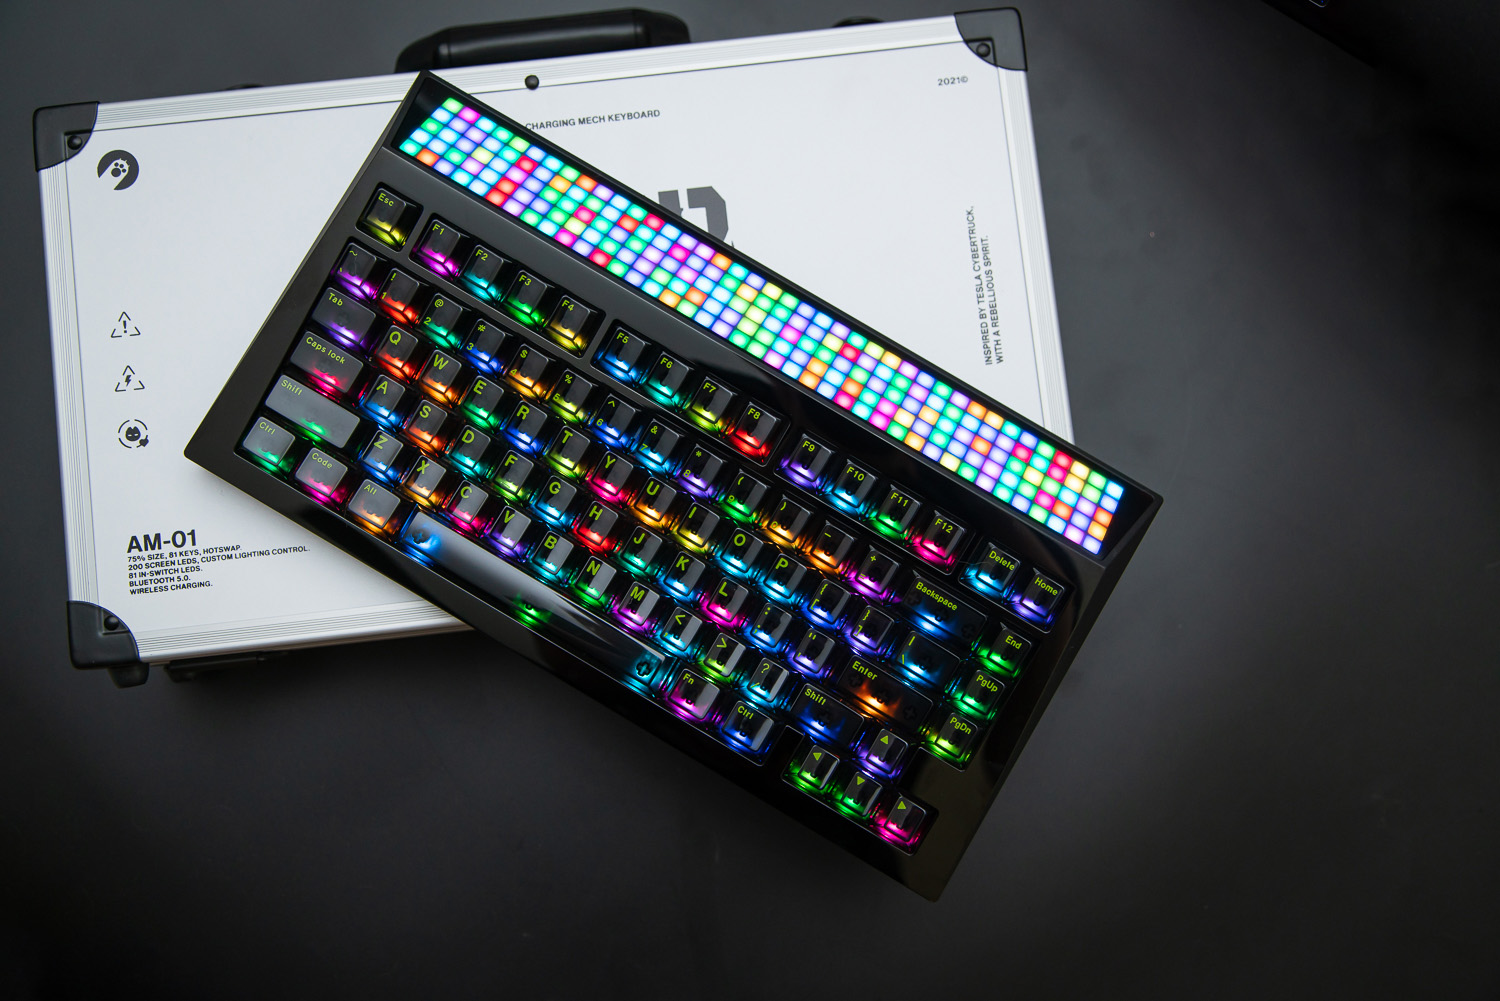 Cyberboard R2 review: Should you spend $700 on a keyboard?